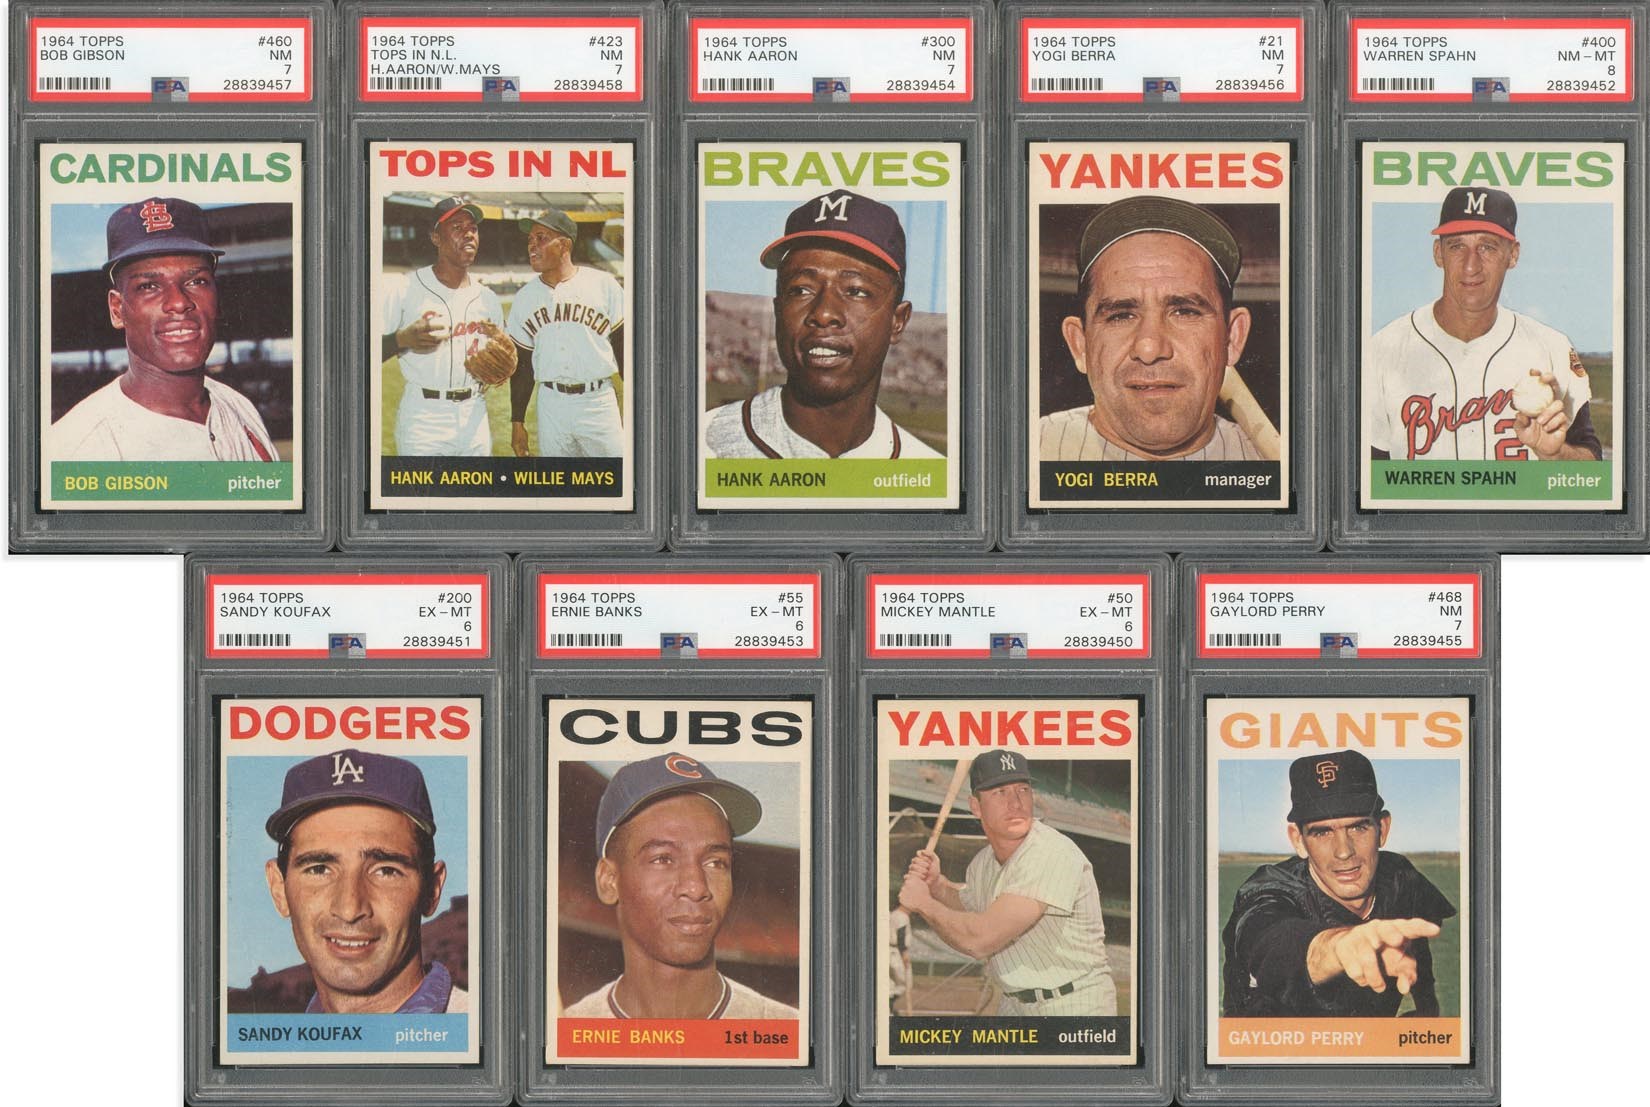 Baseball and Trading Cards - 1964 Topps Complete Set of 587 Cards with 9 PSA Graded